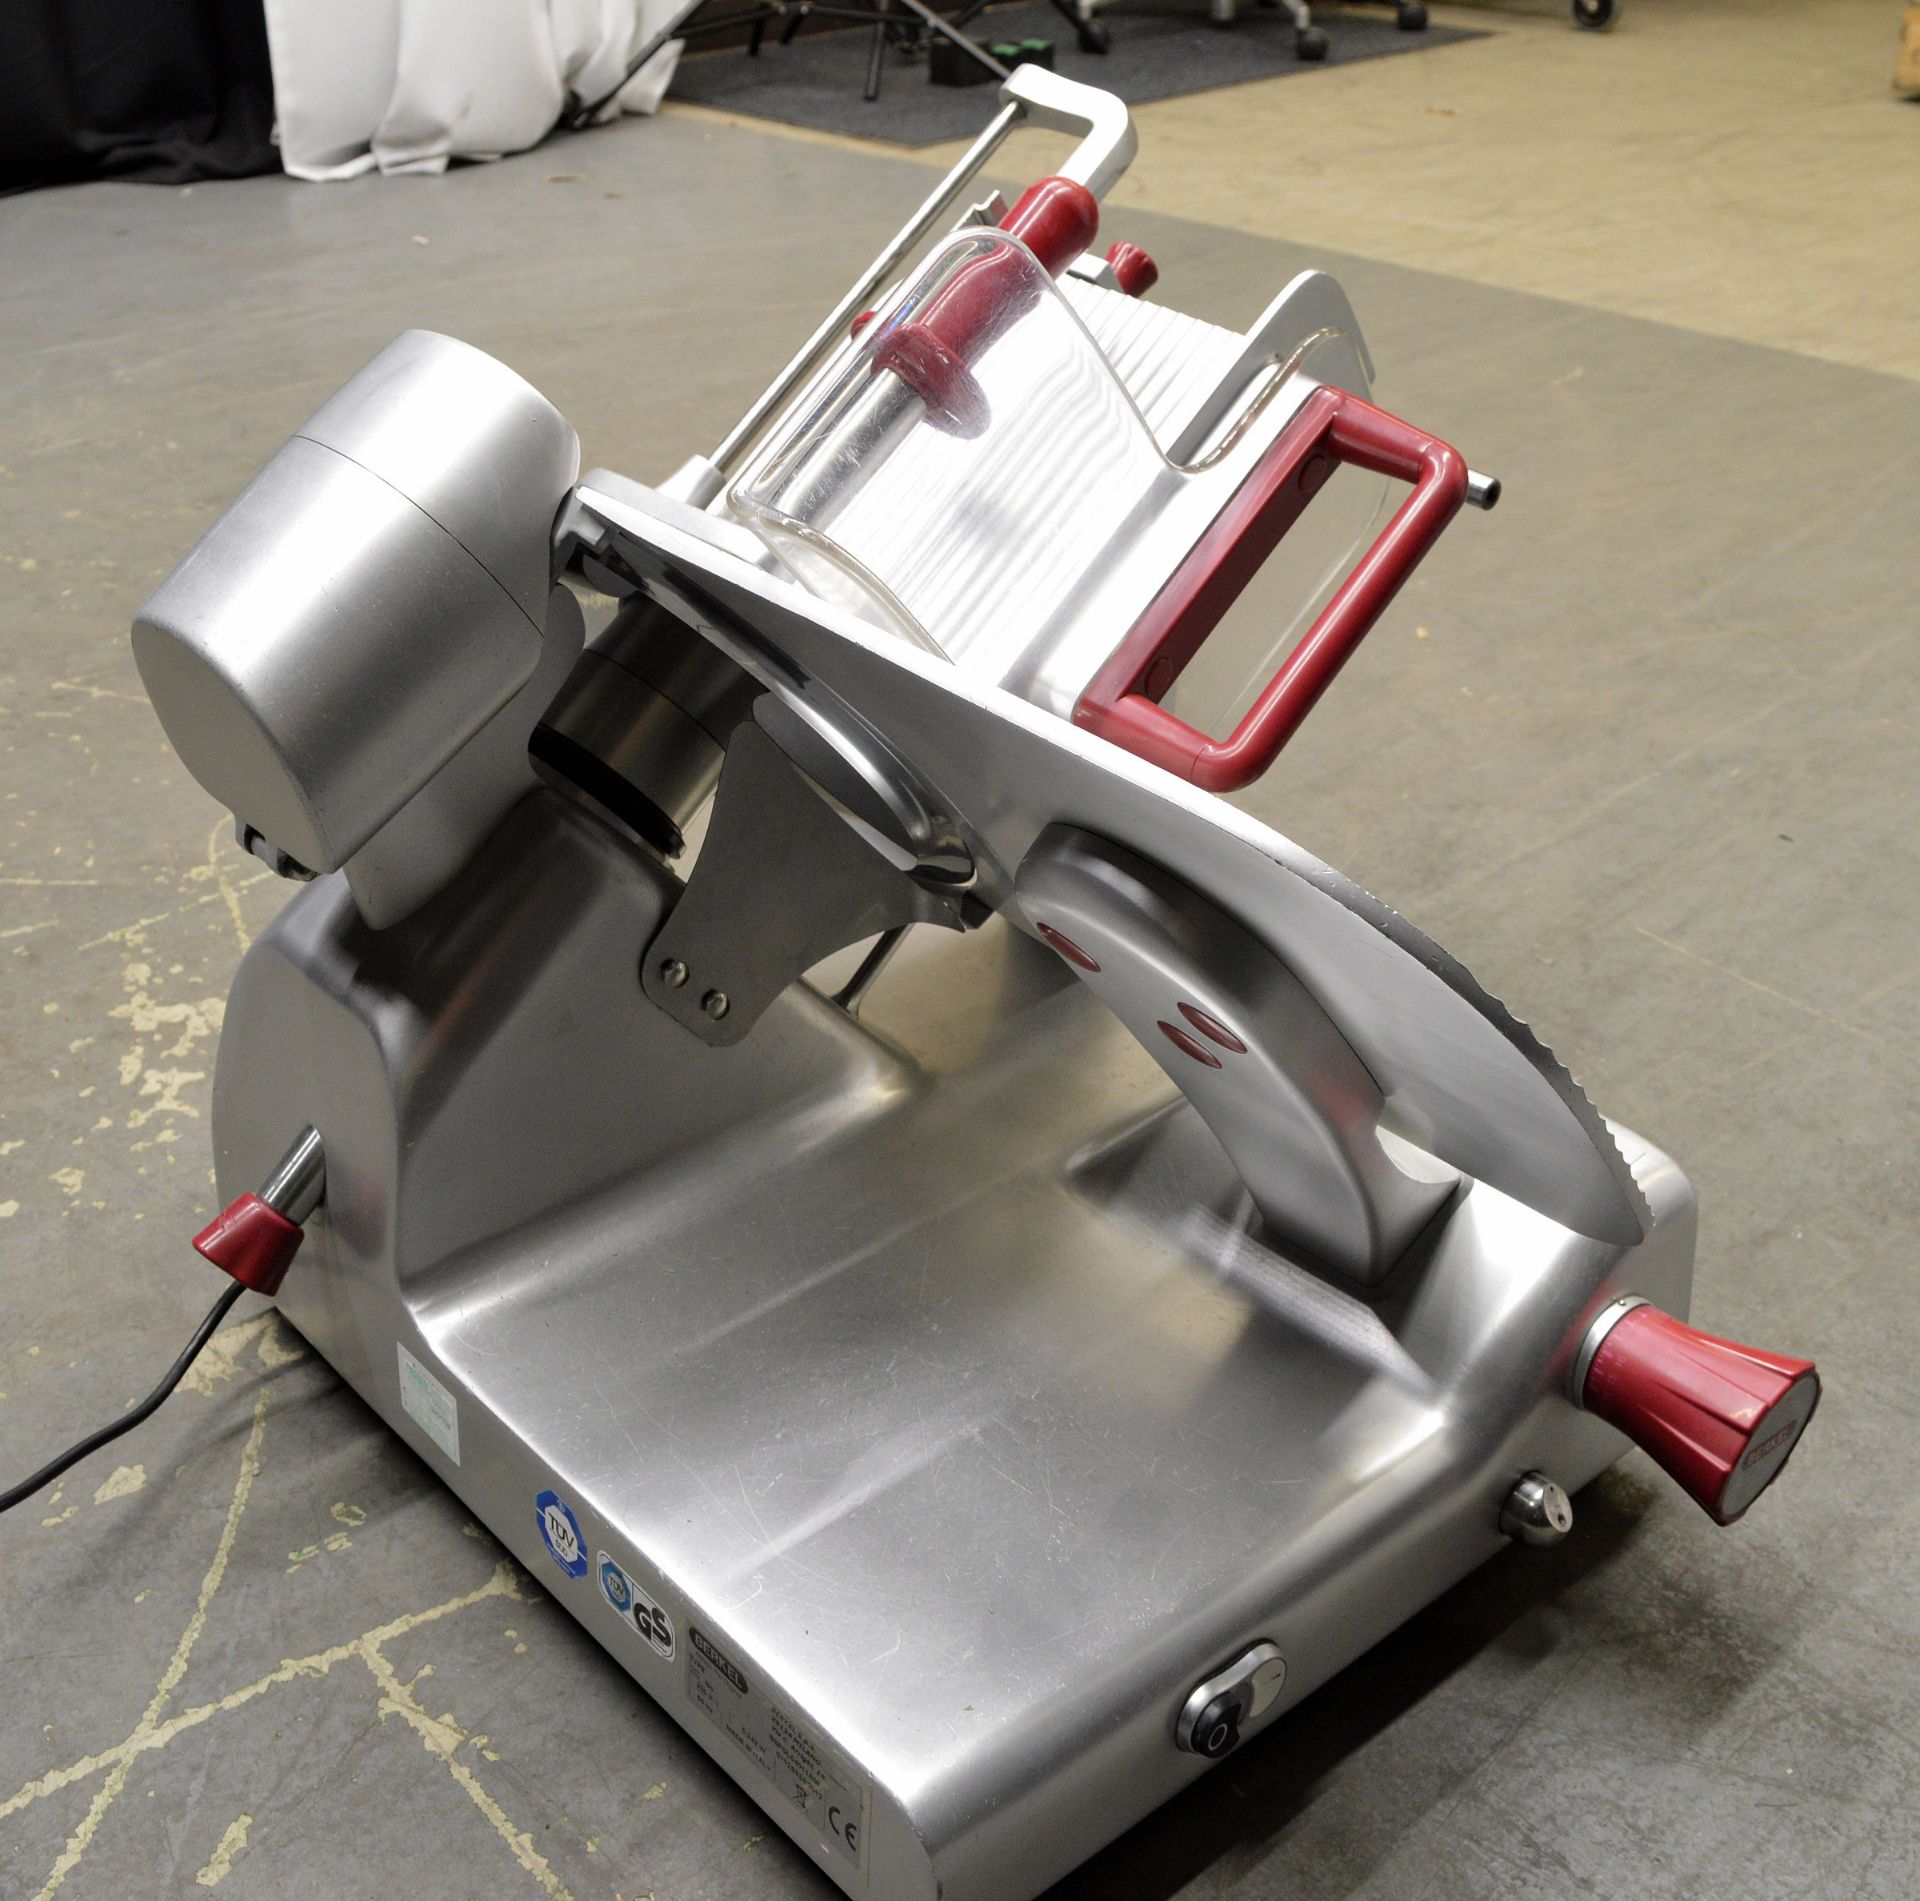 Berkel BSPGL04011A0F 12" Commercial Cooked Meat / Bacon Slicer, single phase electric - Image 4 of 7